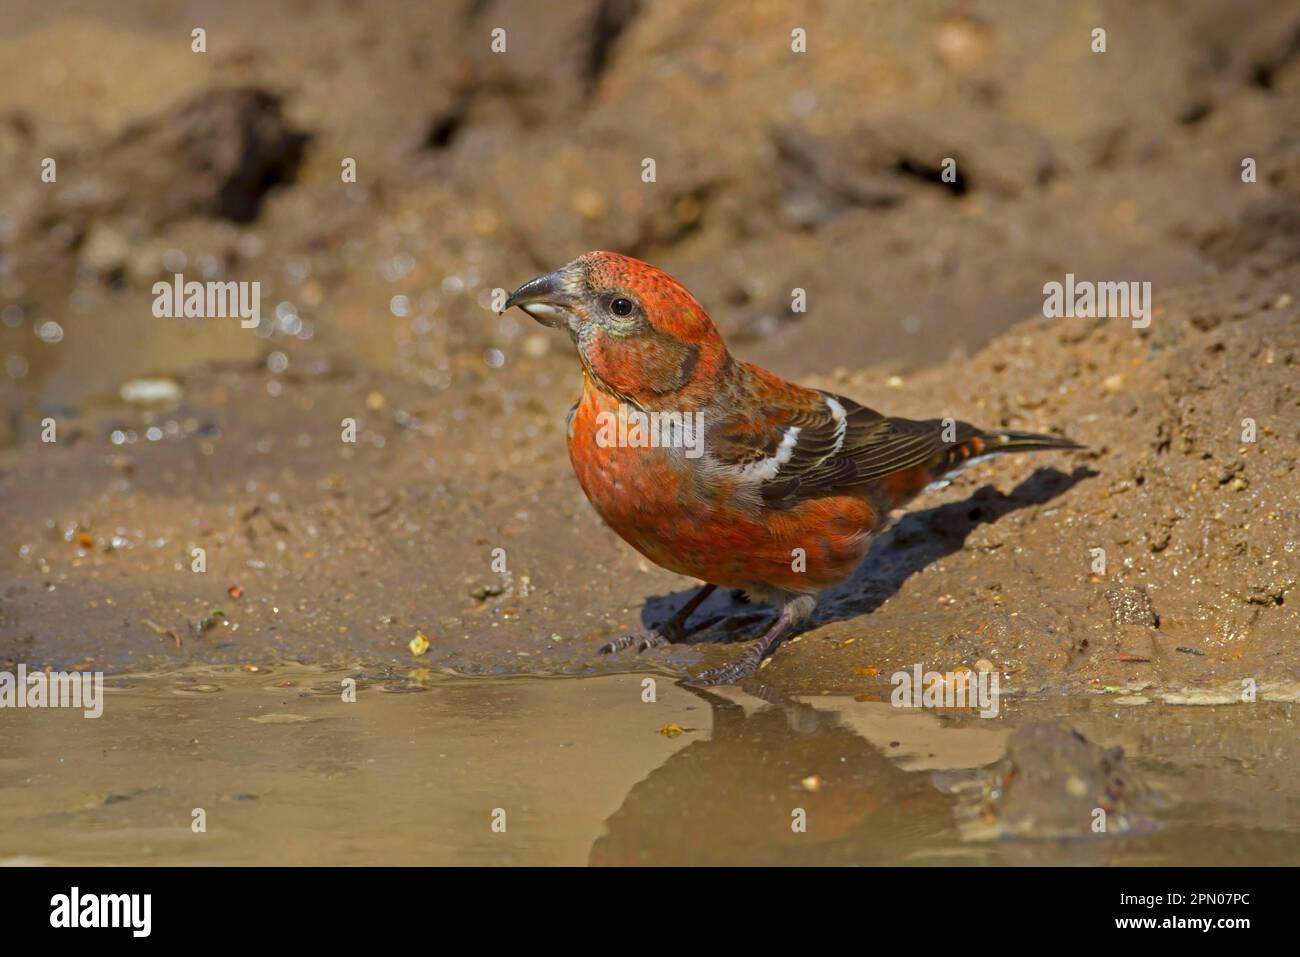 Two-barred crossbill (Loxia leucoptera), Banded Crossbill, Banded Crossbills, Songbirds, Animals, Birds, Finches, Two-barred Crossbill adult male Stock Photo